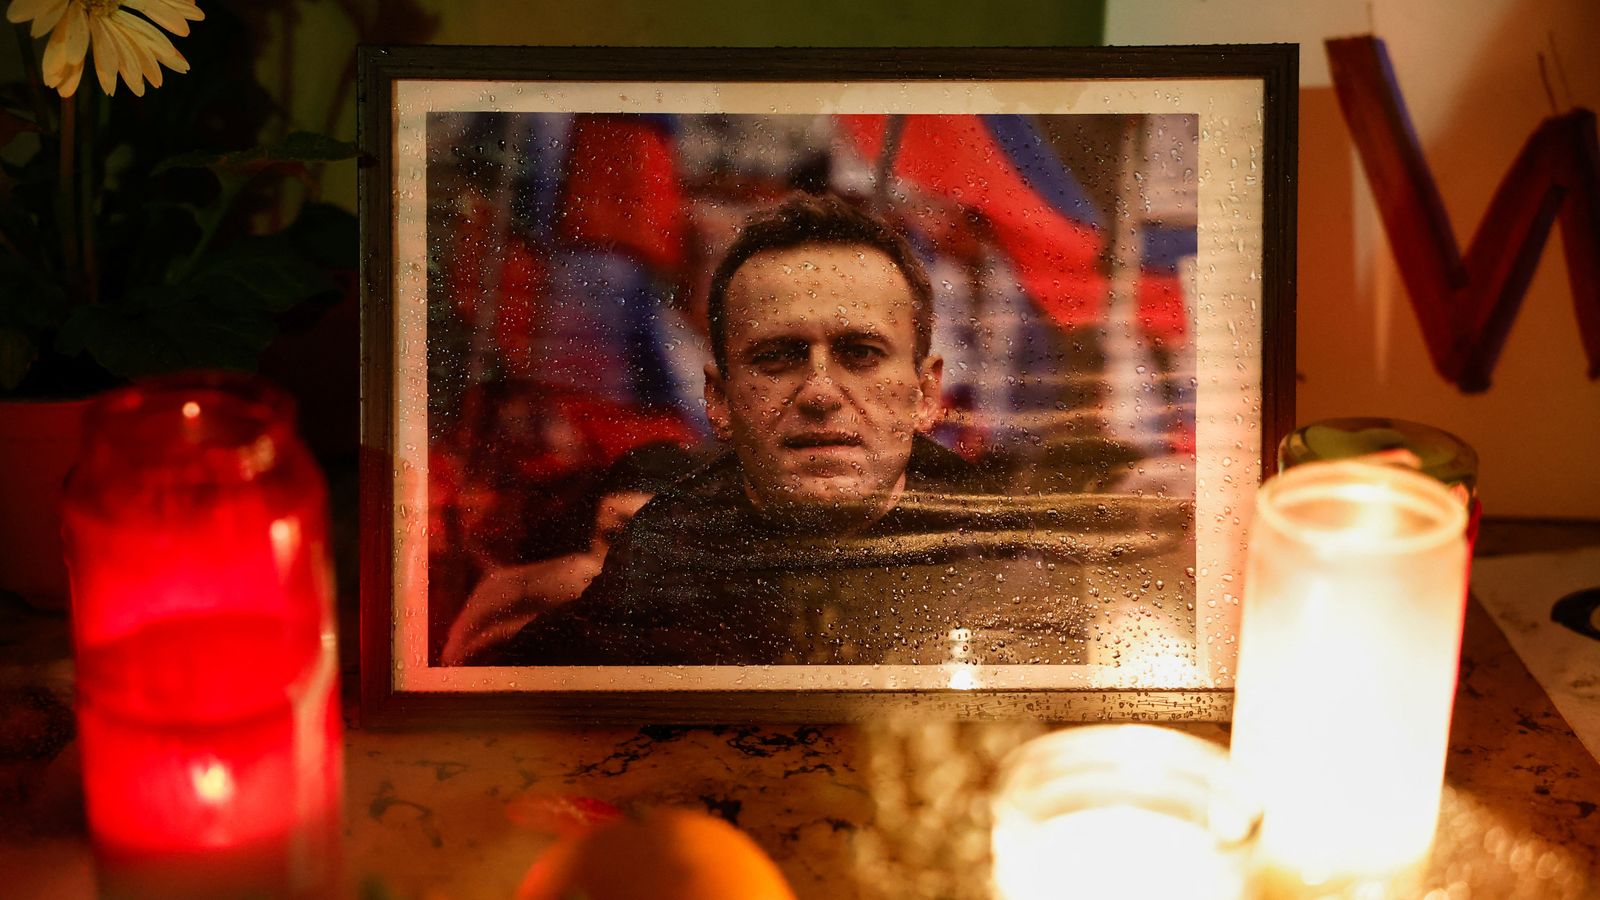 Ukraine war: Hundreds of new sanctions placed on Russia by US and EU after Alexei Navalny's death